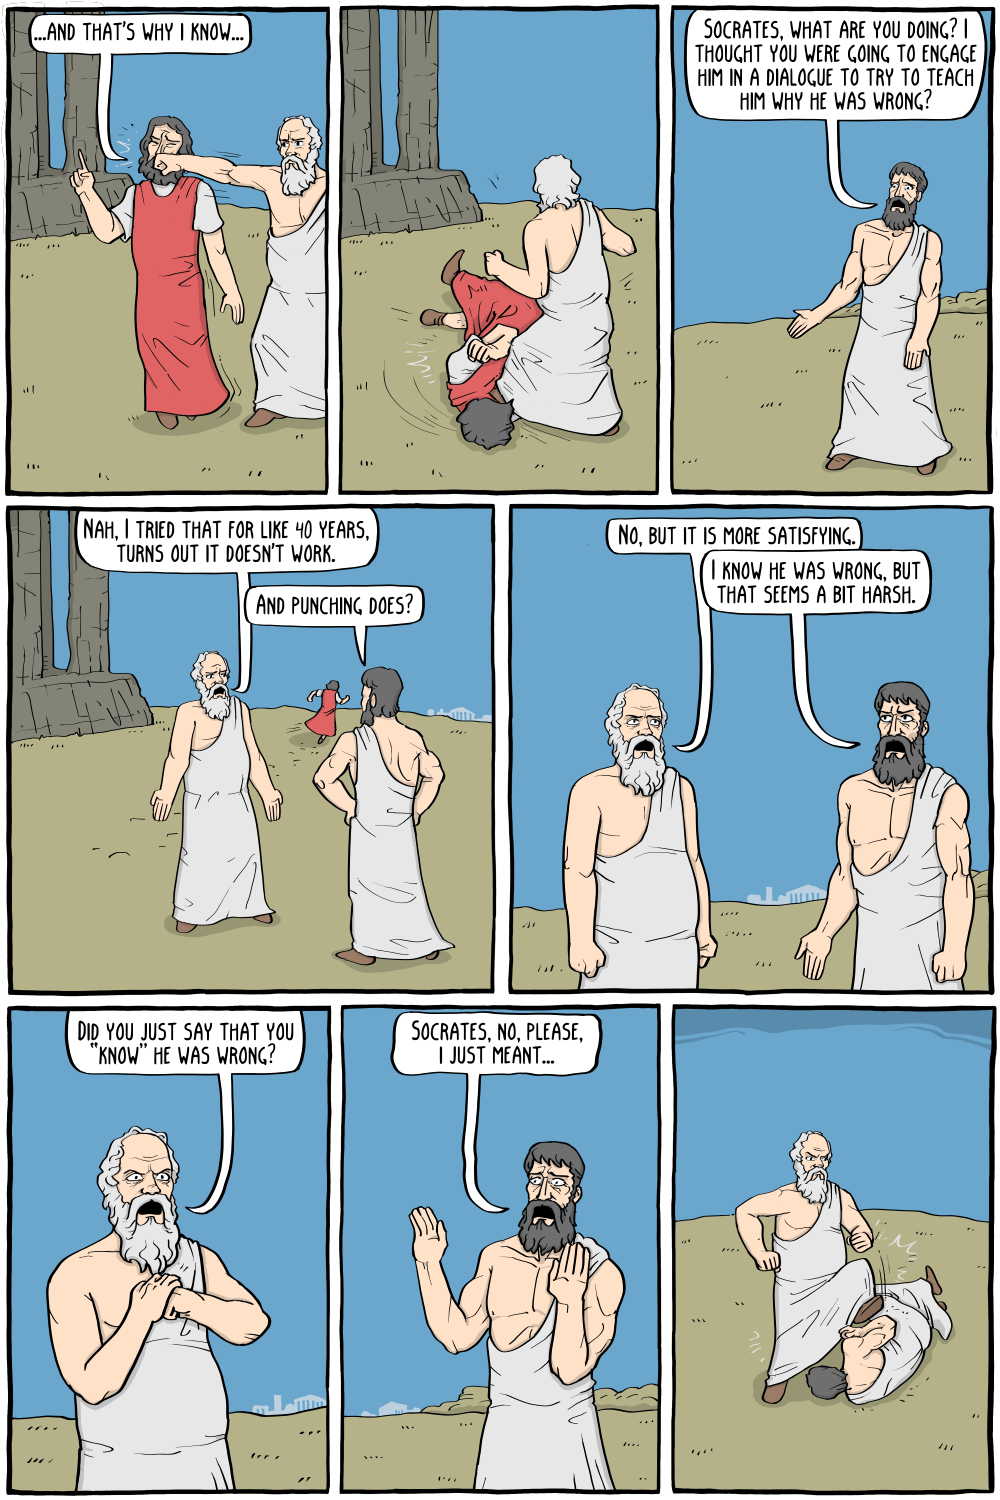 Protagoras: "...and that's why I know..."
Description: Socrates interrupts him by punching him, then continues to kick him on the ground.

Plato: "Socrates, what are you doing? I thought you were going to engage him in a dialogue to try to teach him why he was wrong? "

Socrates: "Nah, I tried that for like 40 years, turns out it doesn't work."
Plato: "And punching does?"

Socrates: "No, but it is more satisfying."
Plato: "I know he was wrong, but that seems a bit harsh."

Socrates, narrowing his eyes: "Did you just say that you â€œknowâ€ he was wrong? "
Plato, backing off: "Socrates, no, please, i just meant..."

Description: Socrates is now kicking Plato on the ground.